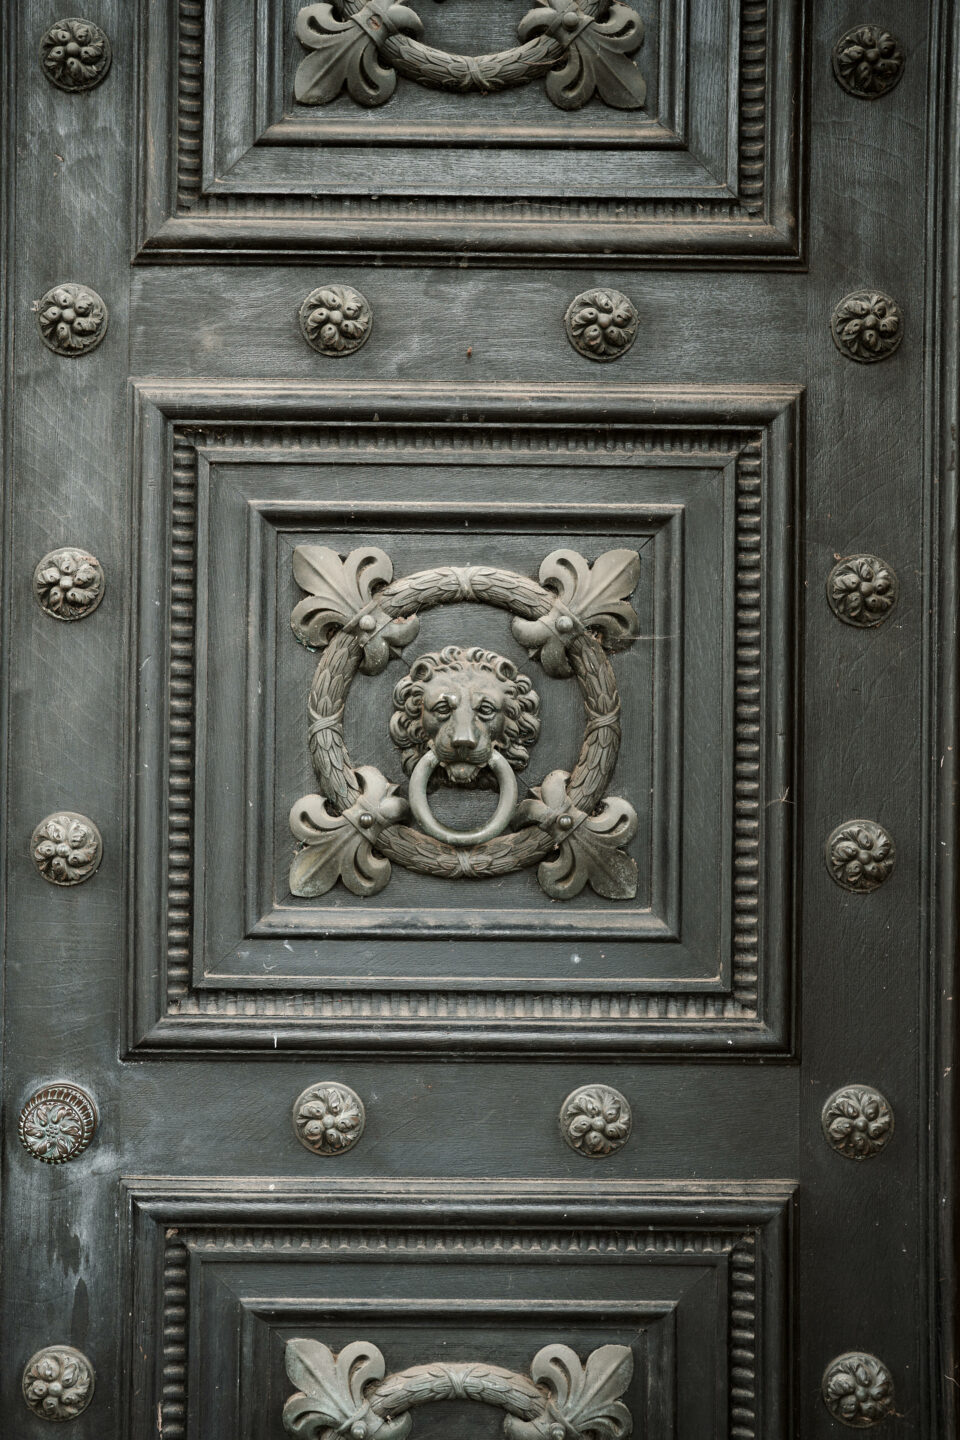 A fancy door with a lion's face on it.